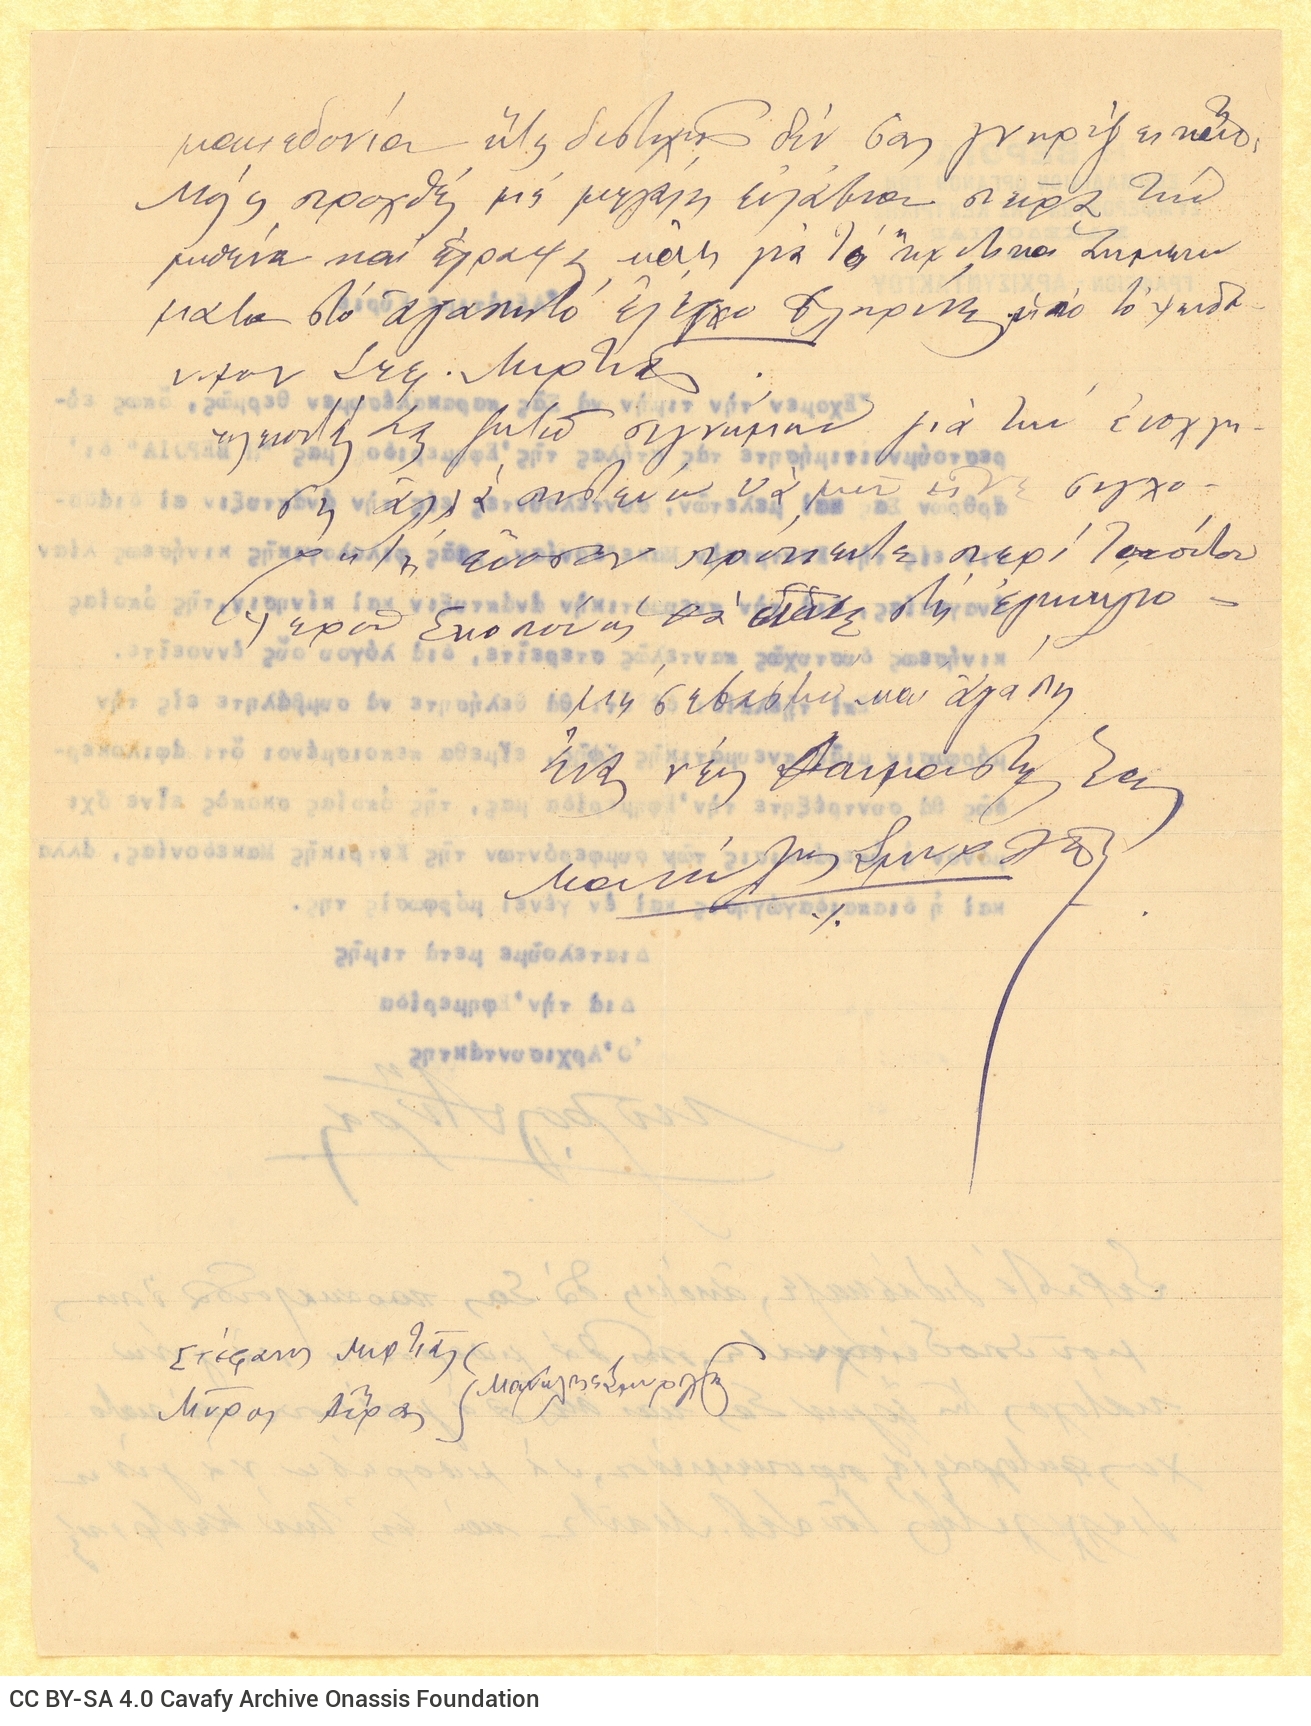 Typewritten letter with a handwritten addition by Myros Avras/Manolis Smyrlis to Cavafy on both sides of a sheet. In the firs